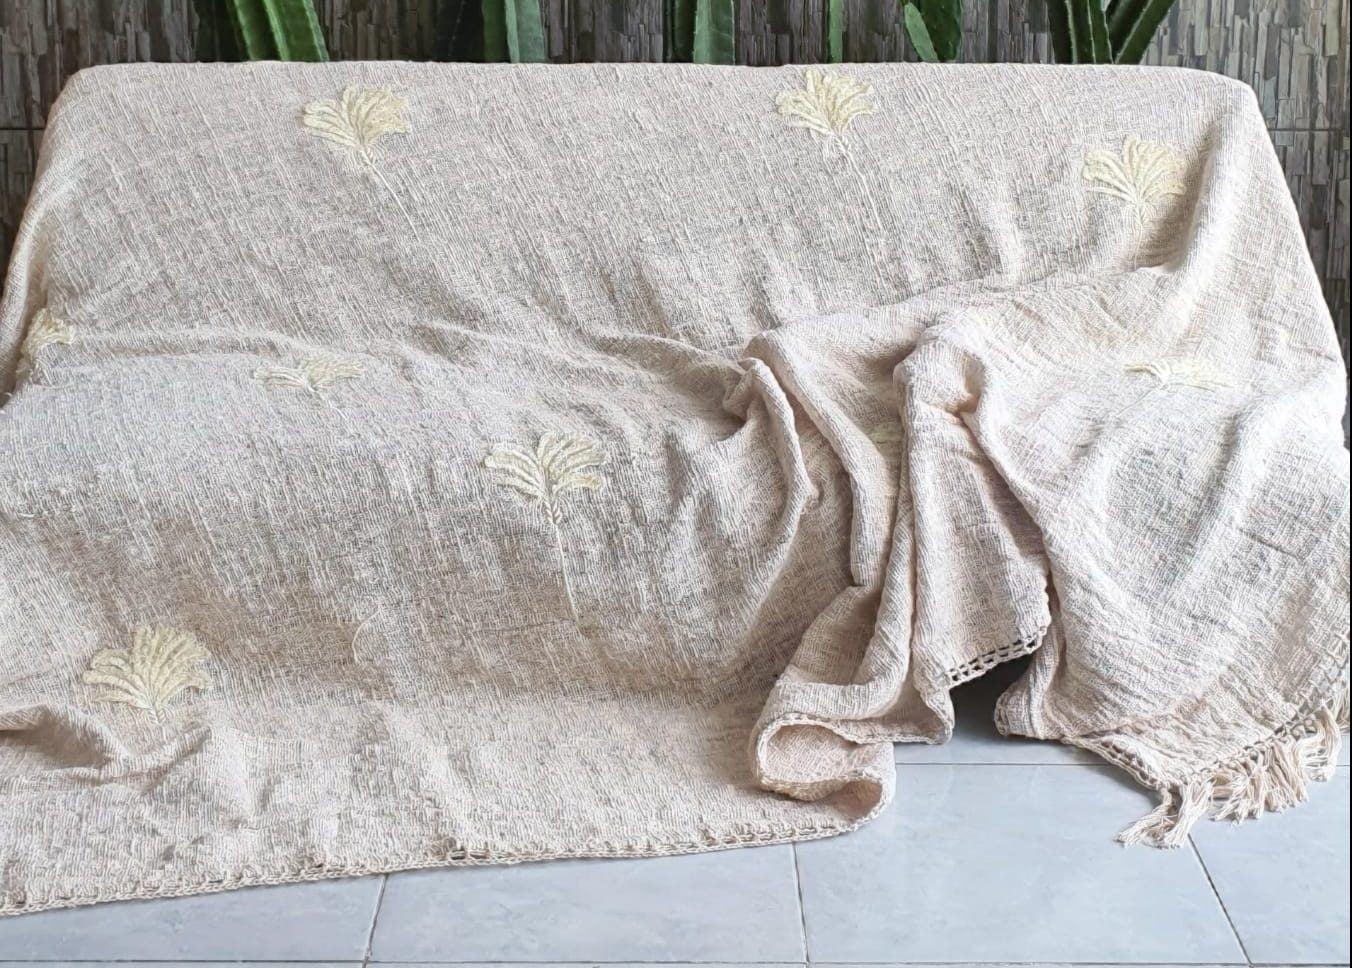 MAC419 NATURAL RAW COTTON THROW WITH PALM EMBROIDERY, LACE EDGE, AND FRINGE